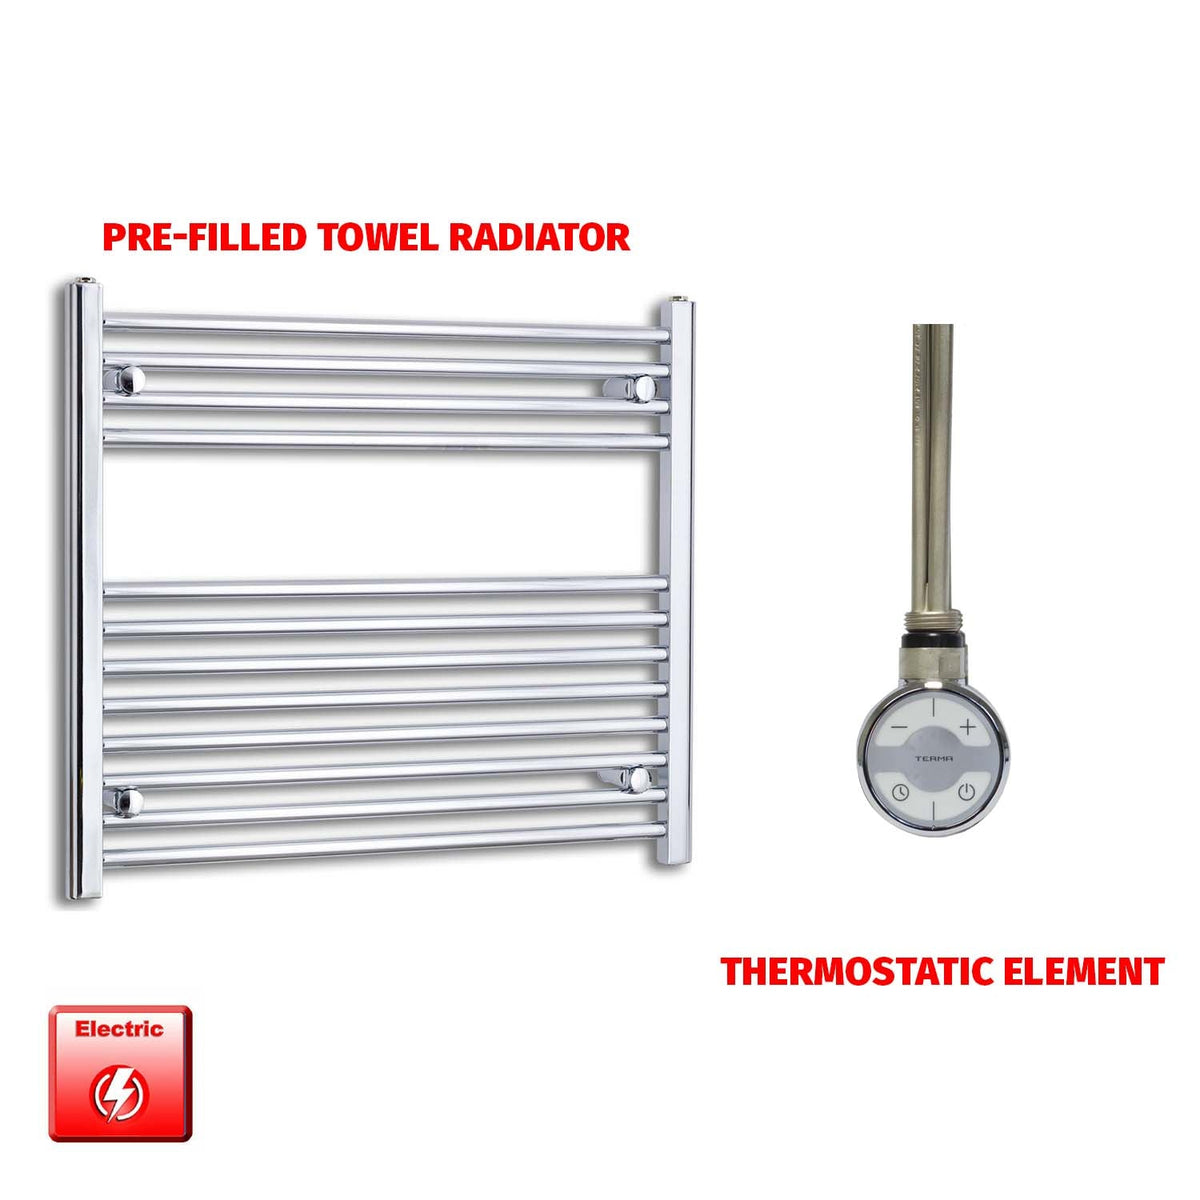 700 x 900 Pre-Filled Electric Heated Towel Radiator Straight Chrome MOA Thermostatic element no timer